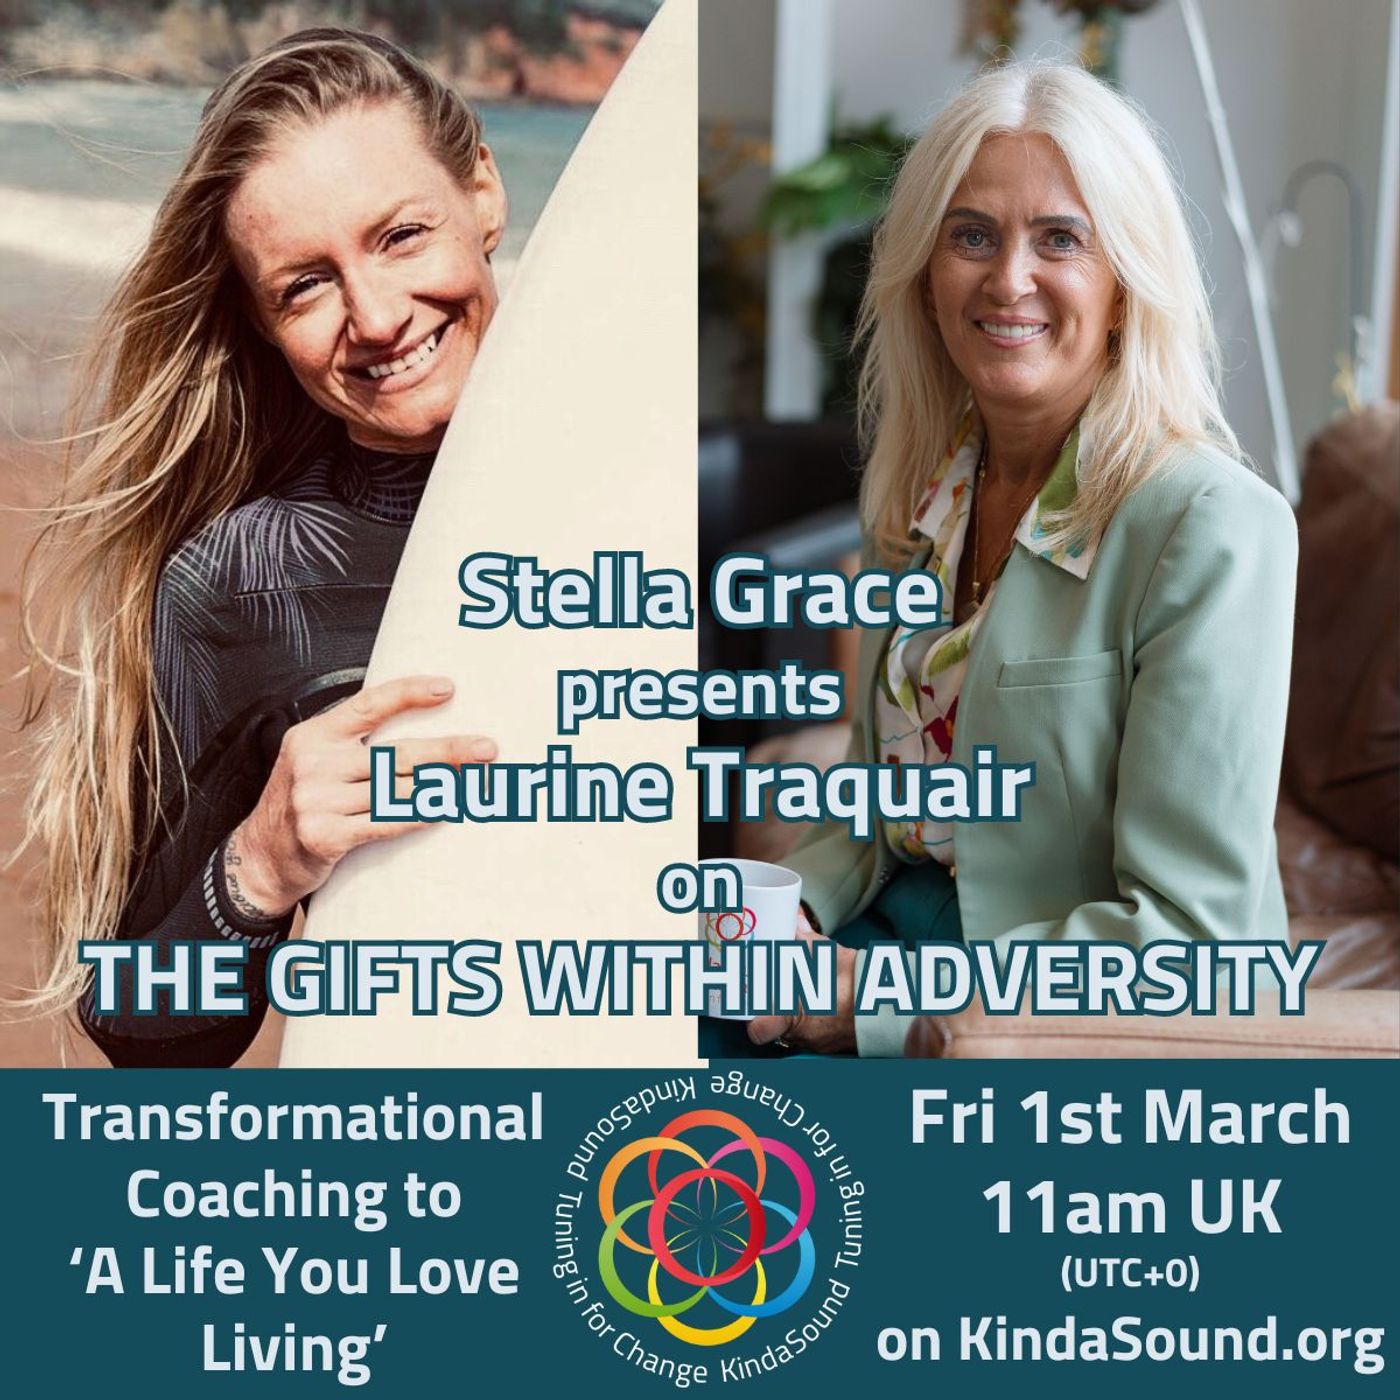 A Life You Love Living | Laurine Traquair on The Gifts Within Adversity with Stella Grace